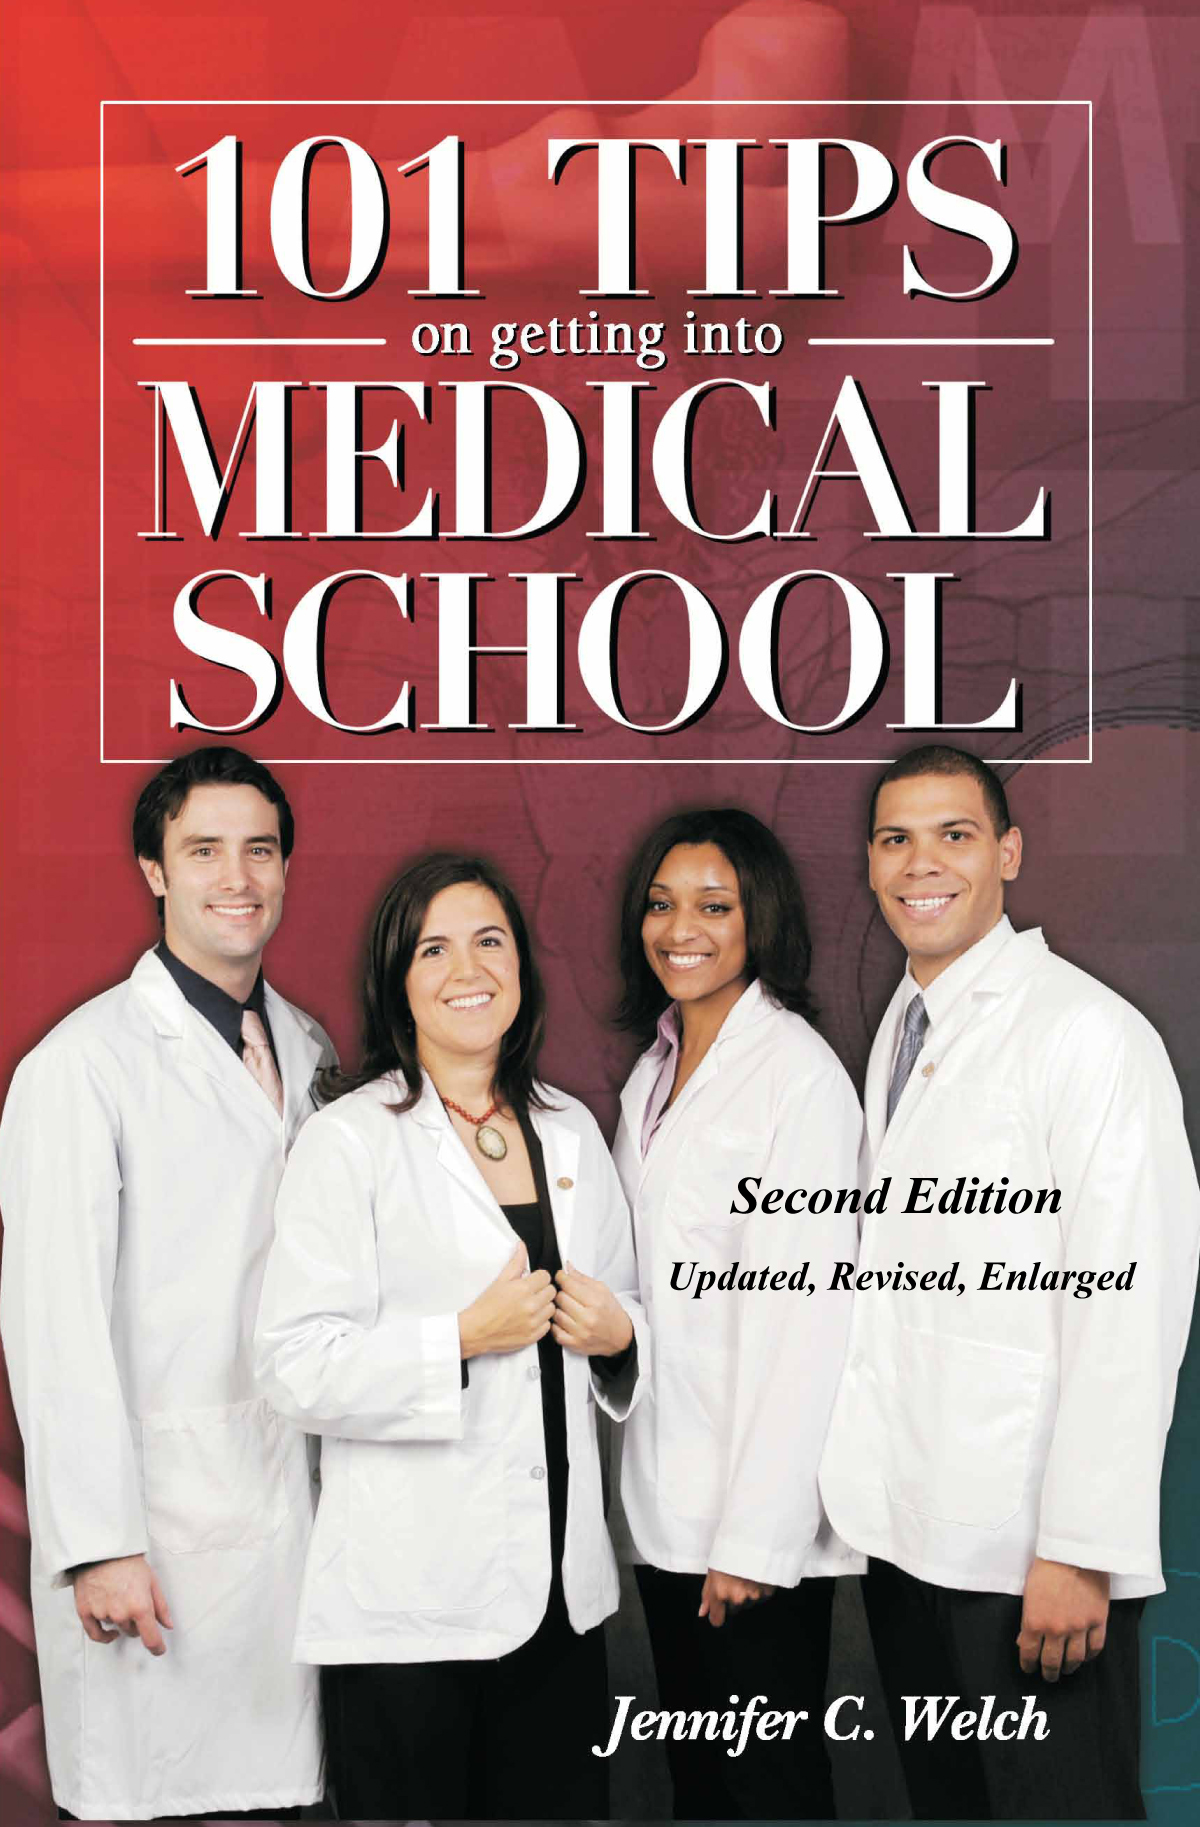 101 Tips on Getting into Medical School - 2nd edition - by Jennifer C. Welch